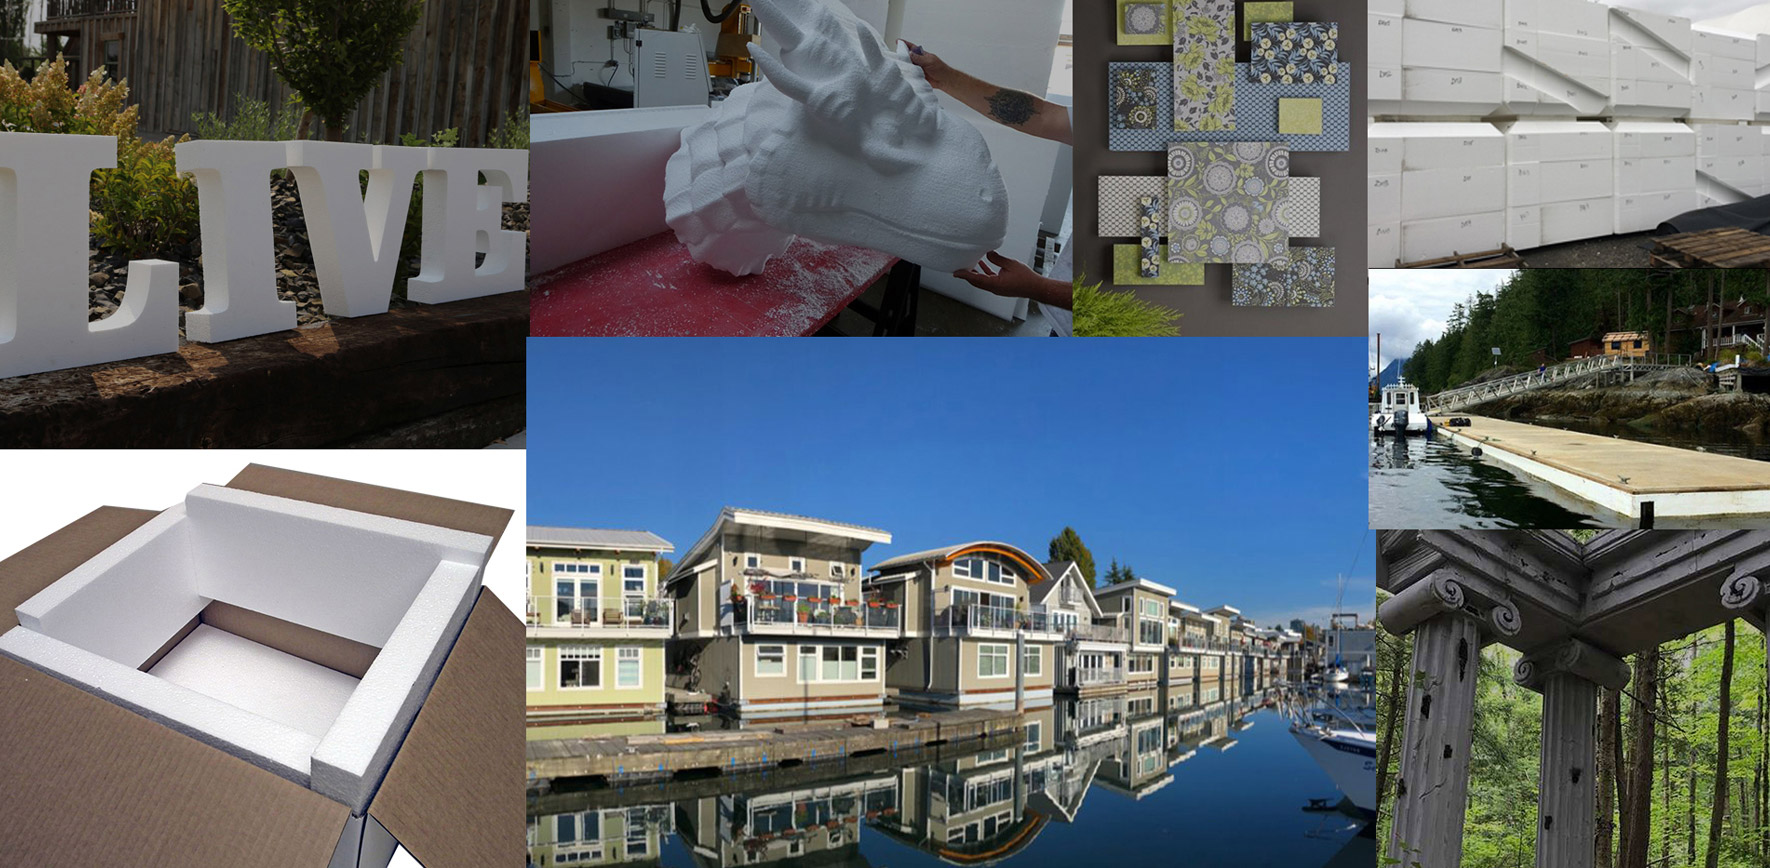 Our Custom Solutions demonstrated as a LIVE sign, floating homes, a dragon head prop, packaging, and roman columns.